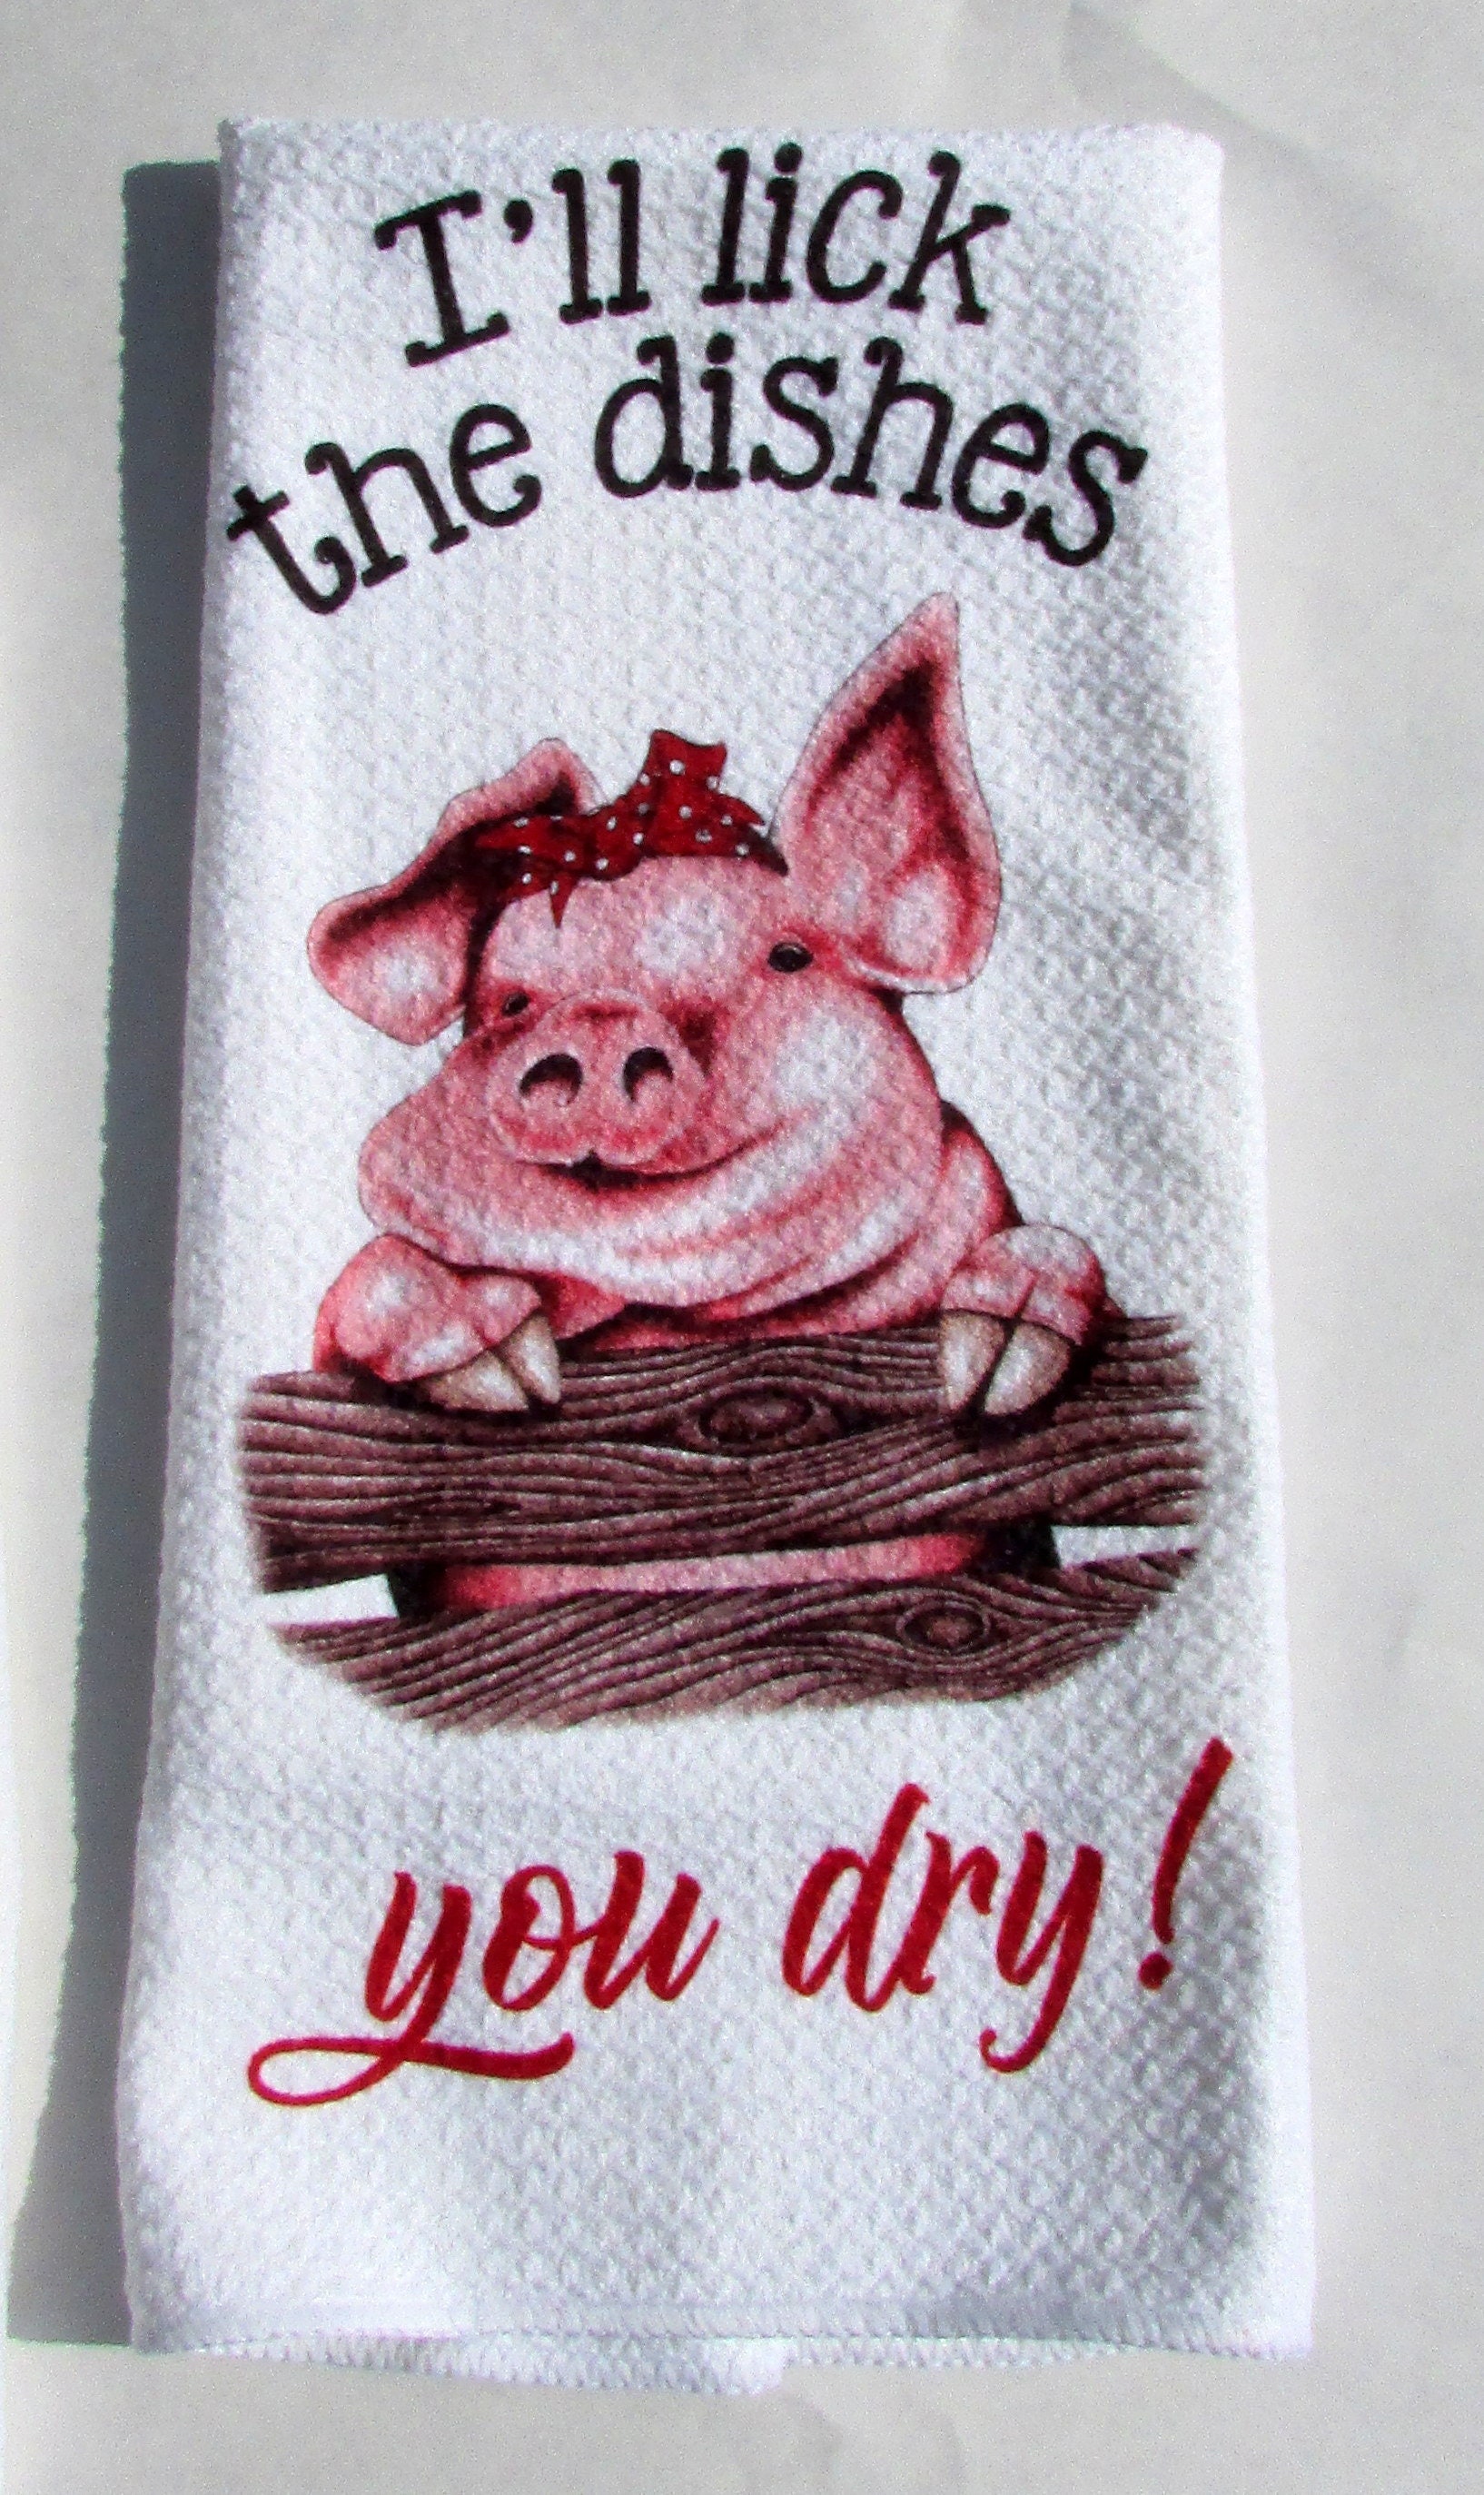 Funny Kitchen Towels, Custom Waffle Weave Towel With Pigs, Hostess Gift,  Housewarming Tea Towels, Country Kitchen Decor 